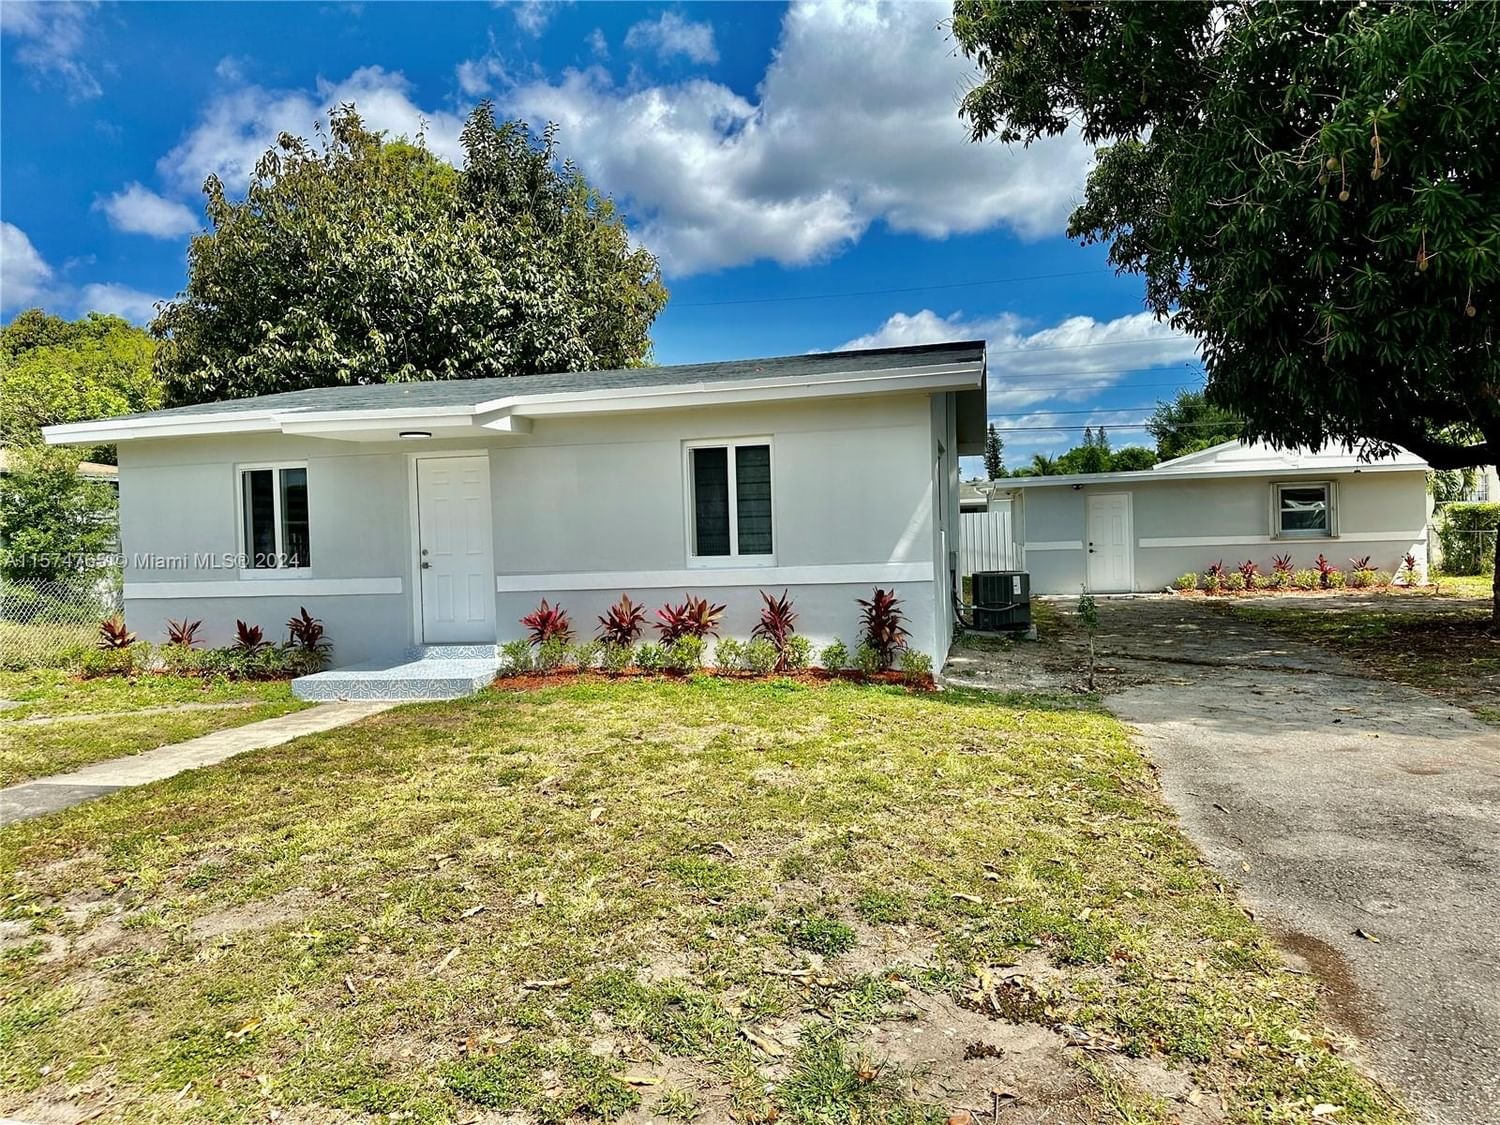 Real estate property located at 2925 63rd St, Miami-Dade County, 62ND STREET HEIGHTS, Miami, FL